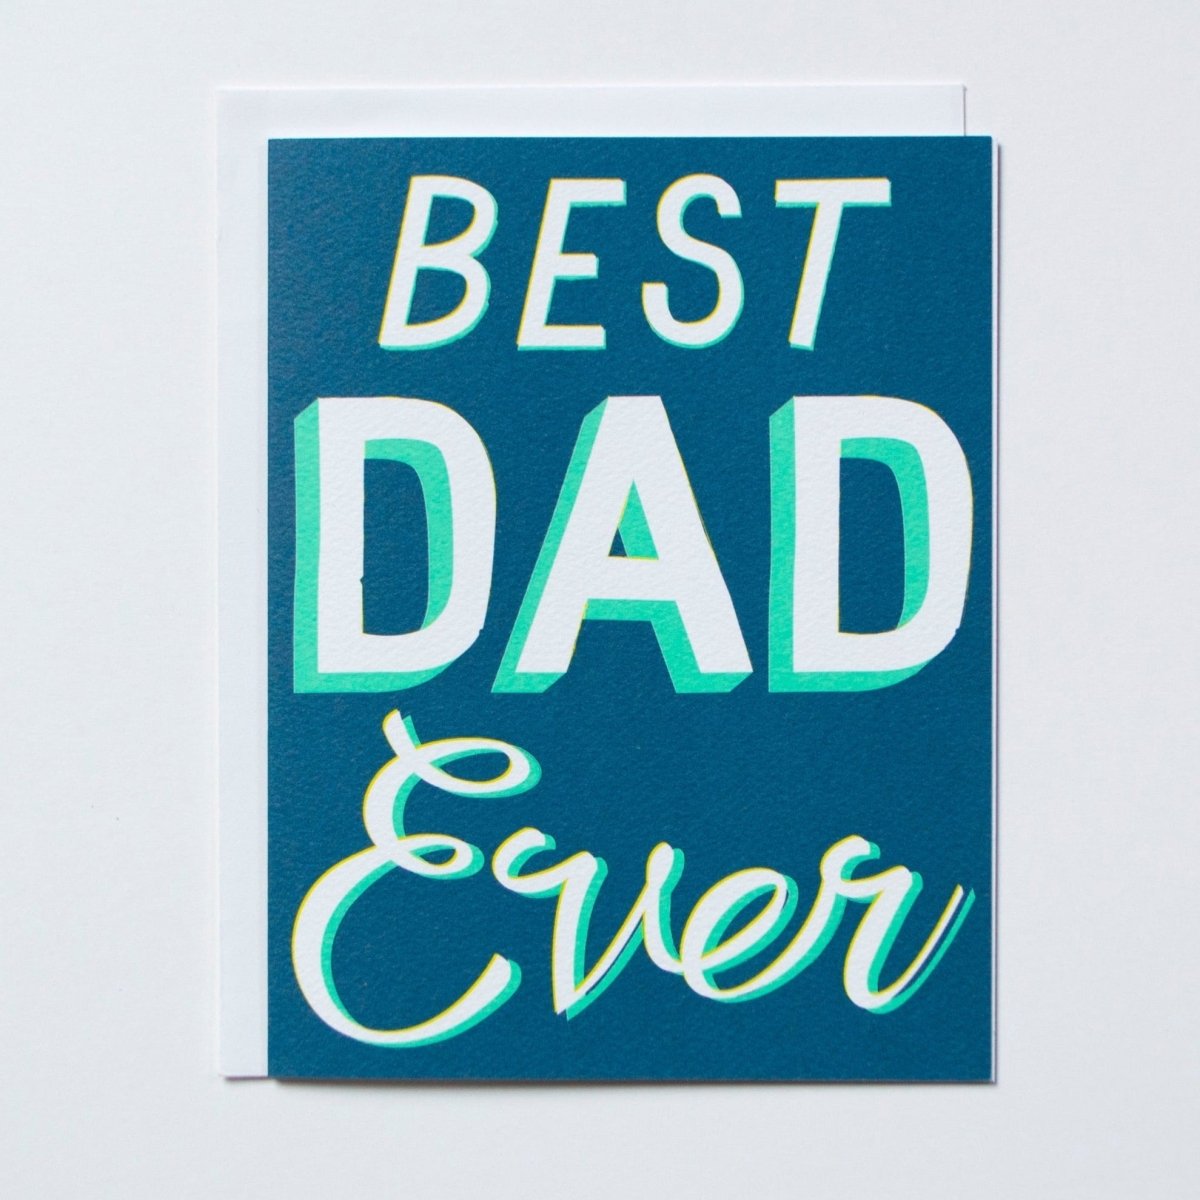 Greeting card reads "BEST DAD EVER" in white and teal script against a blue background. Printed by Banquet Atelier in Vancouver, Canada.